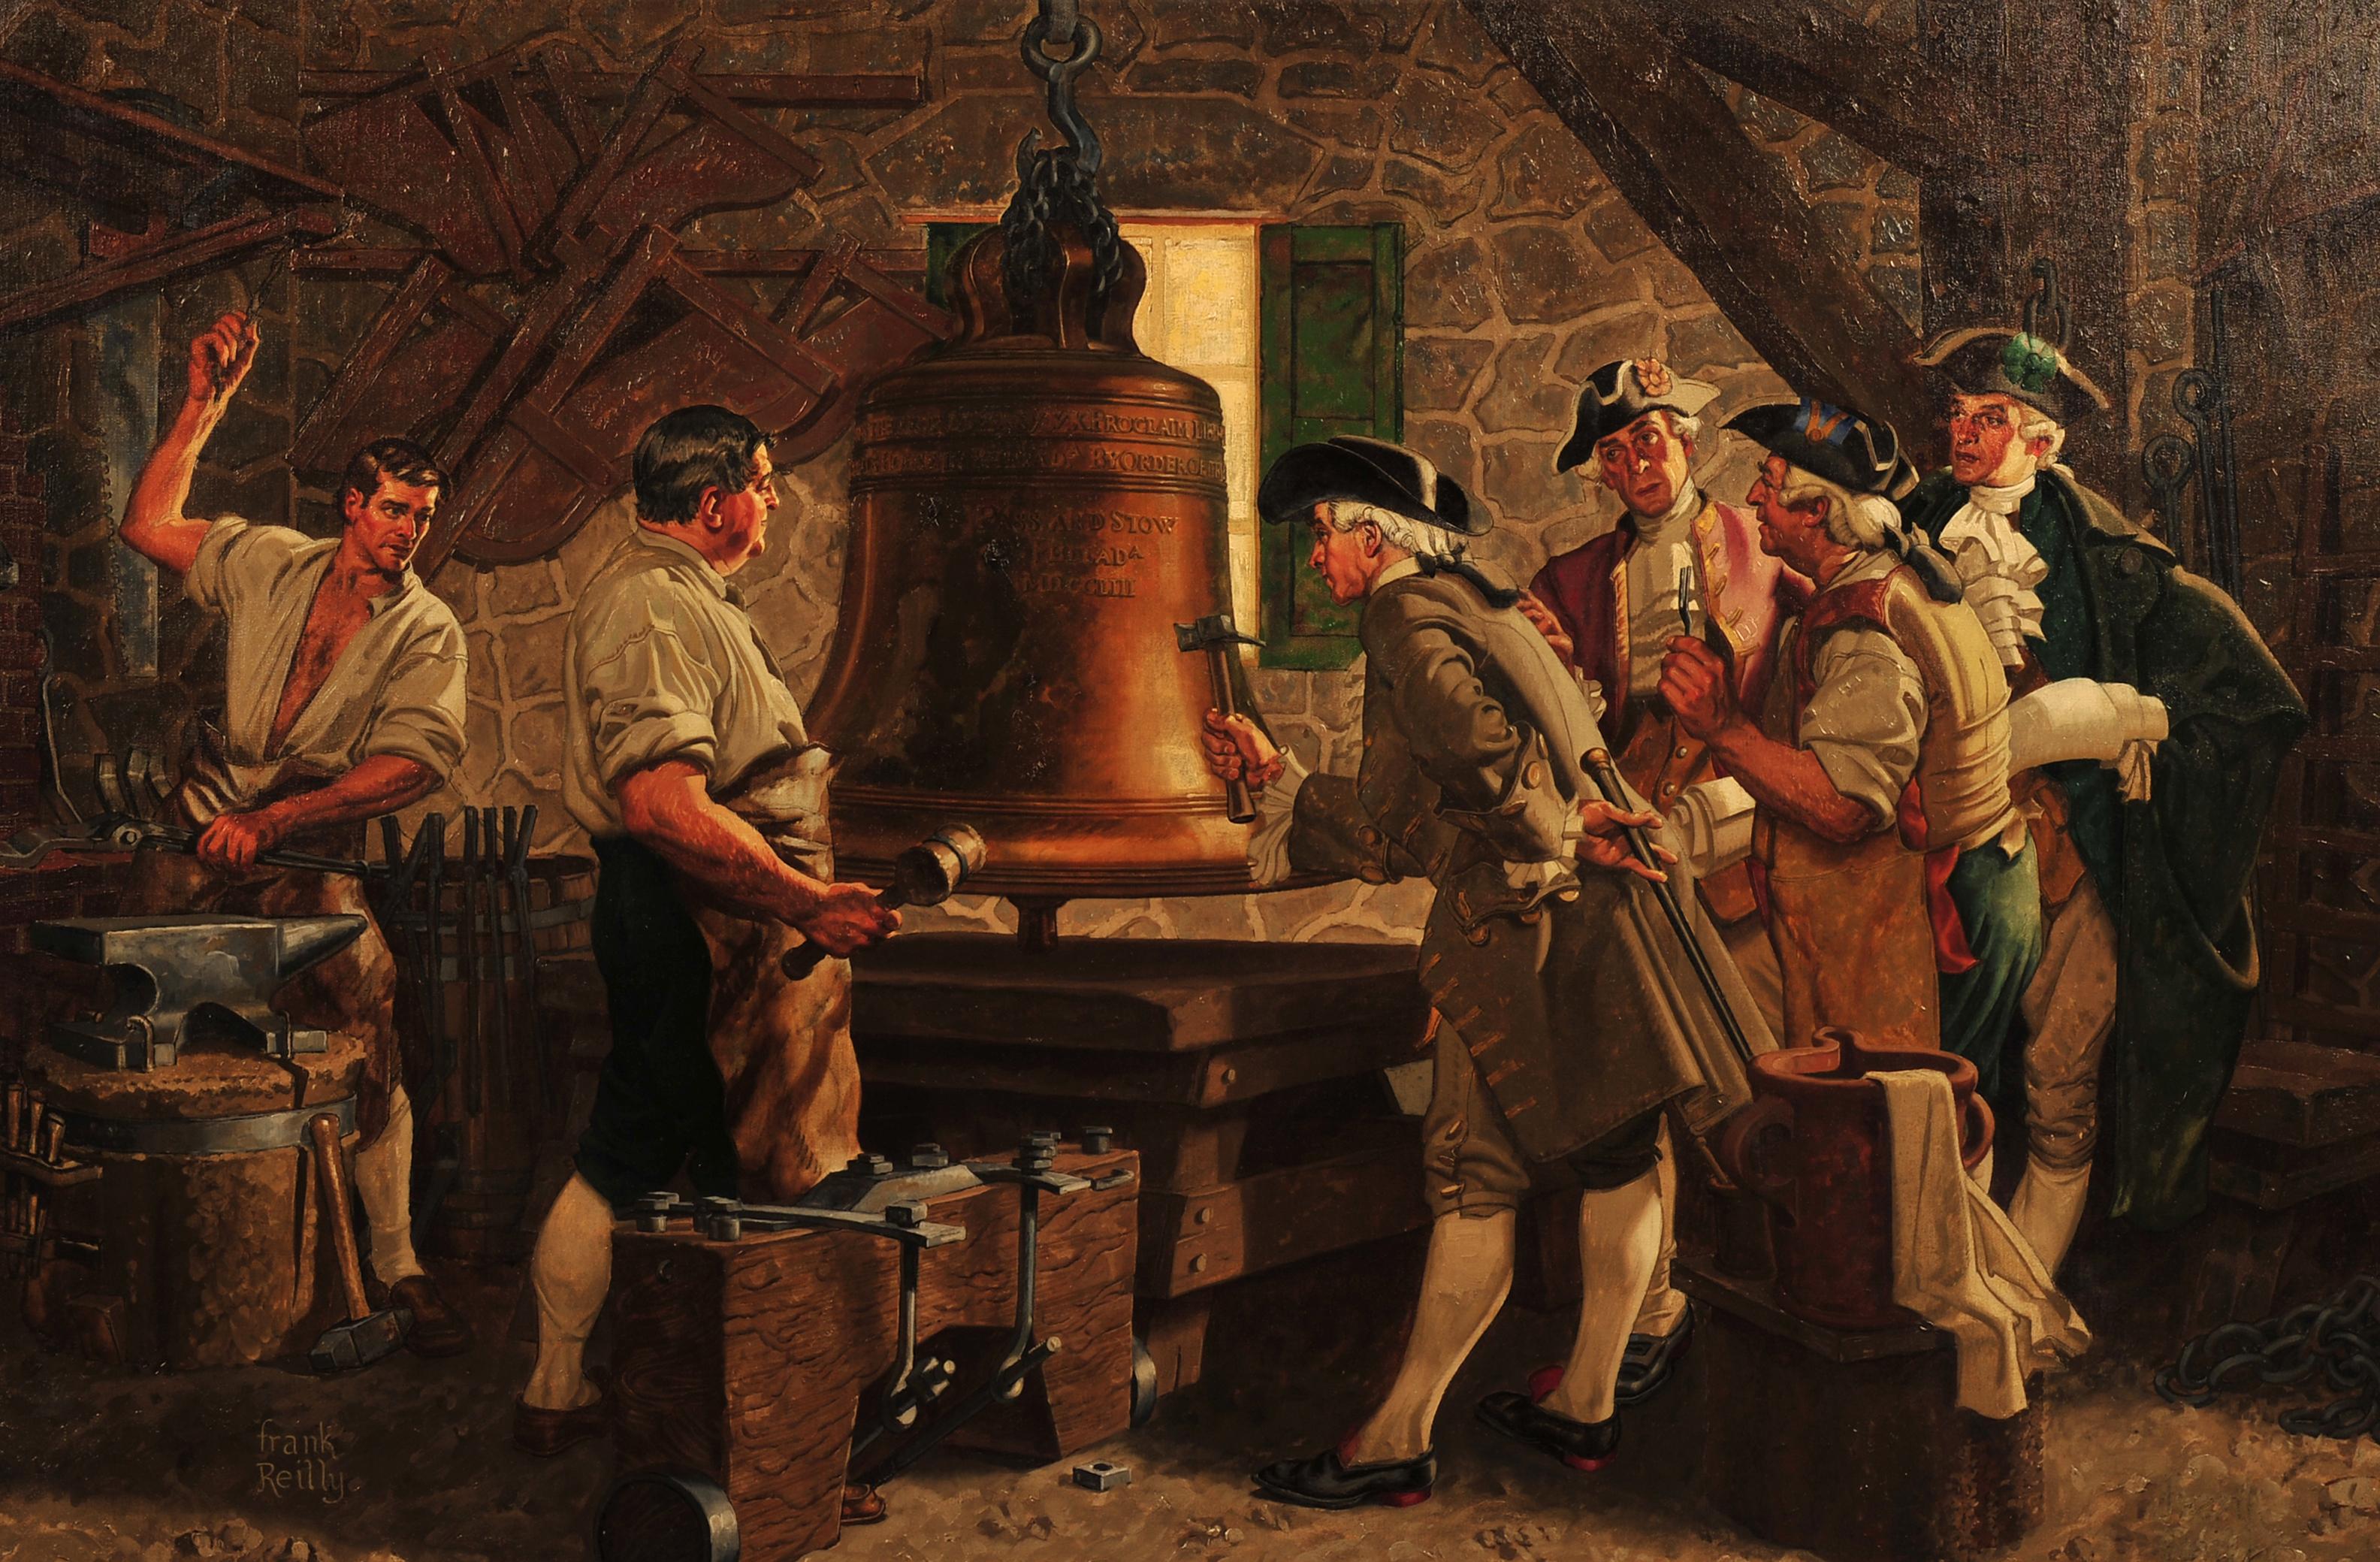 Liberty Bell - Painting by Frank J. Reilly